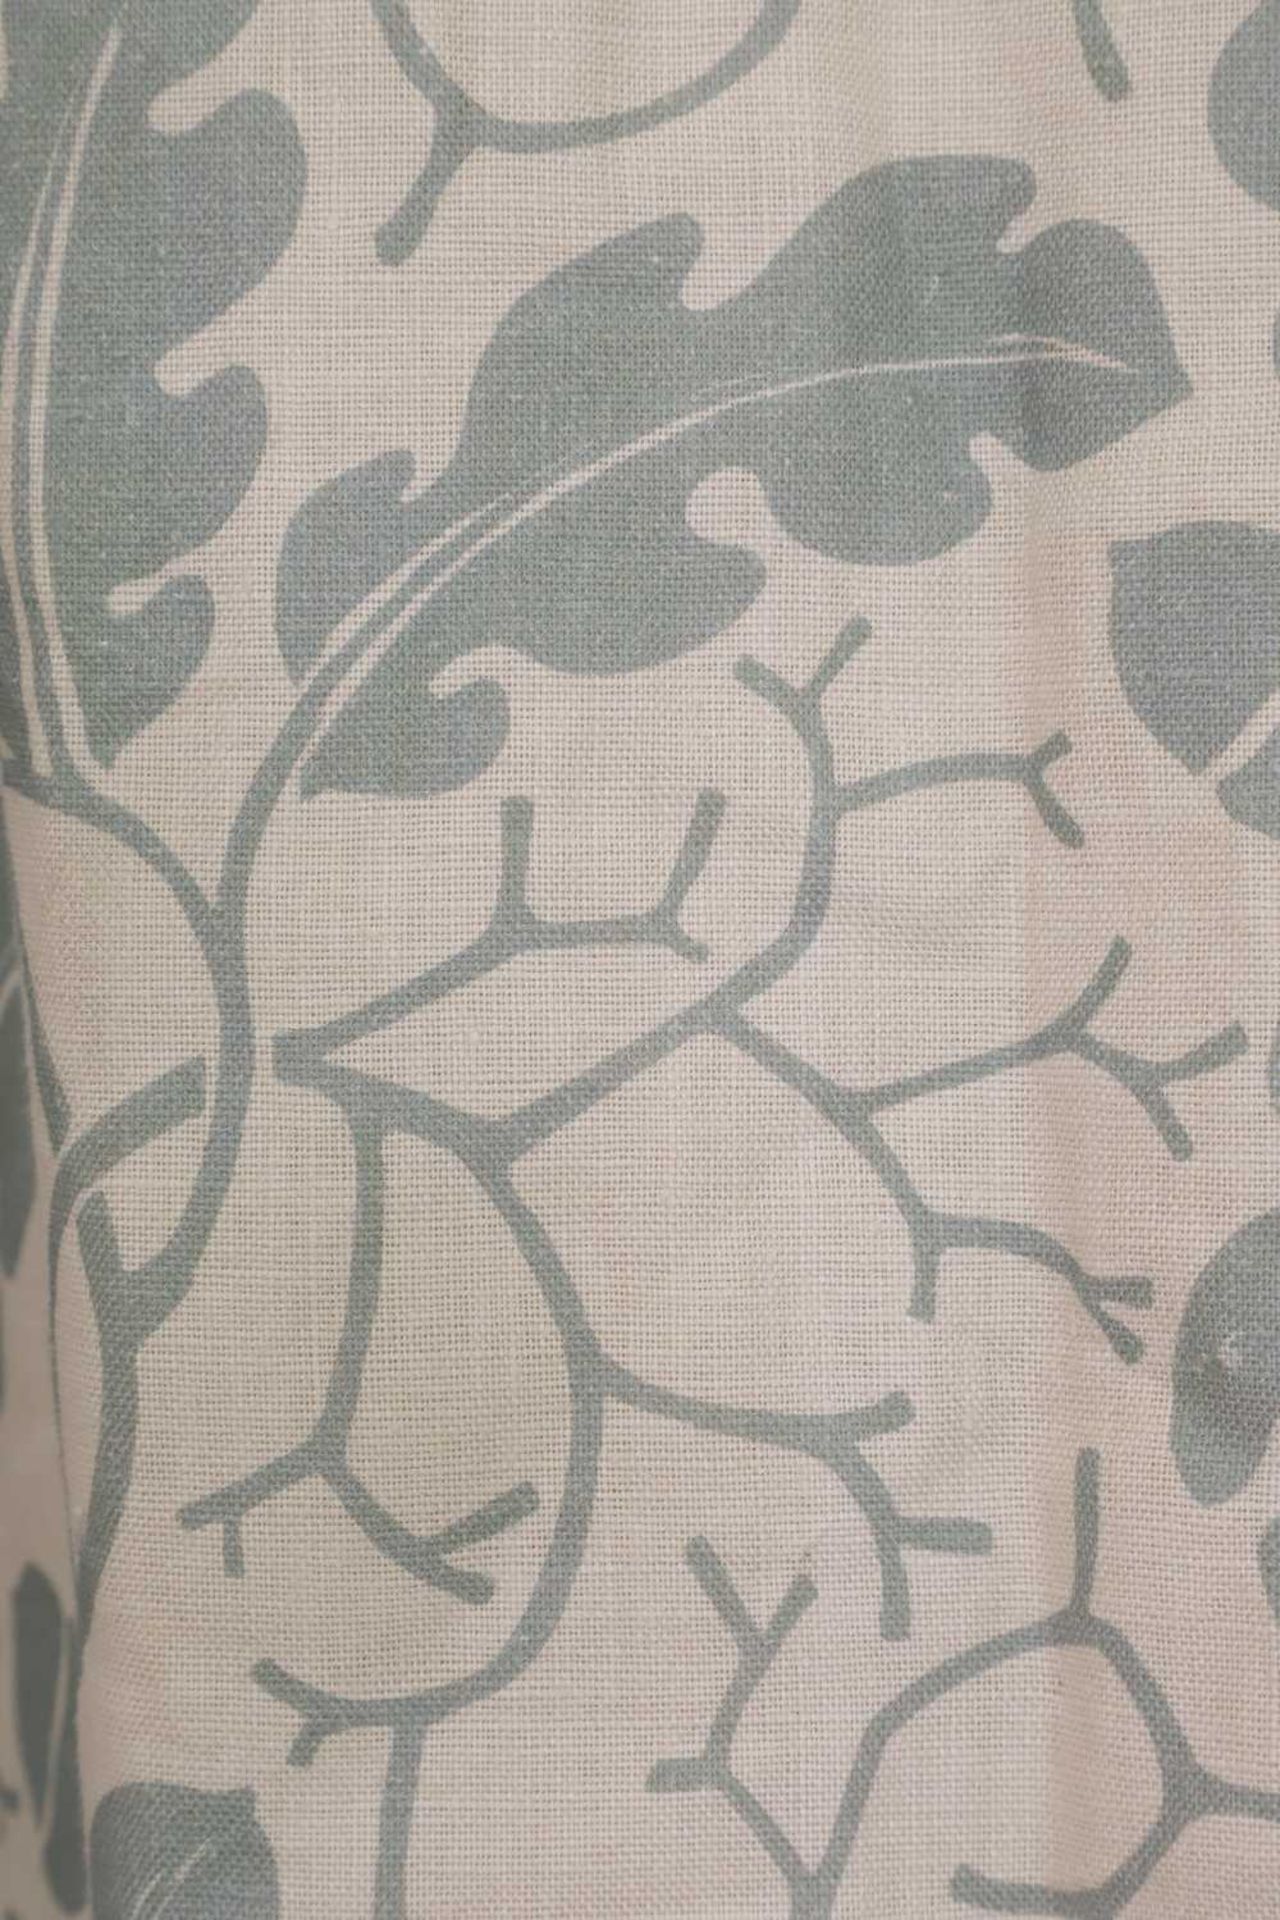 Two pairs of 'Oak Leaves' curtains by Robert Kime, - Image 10 of 14